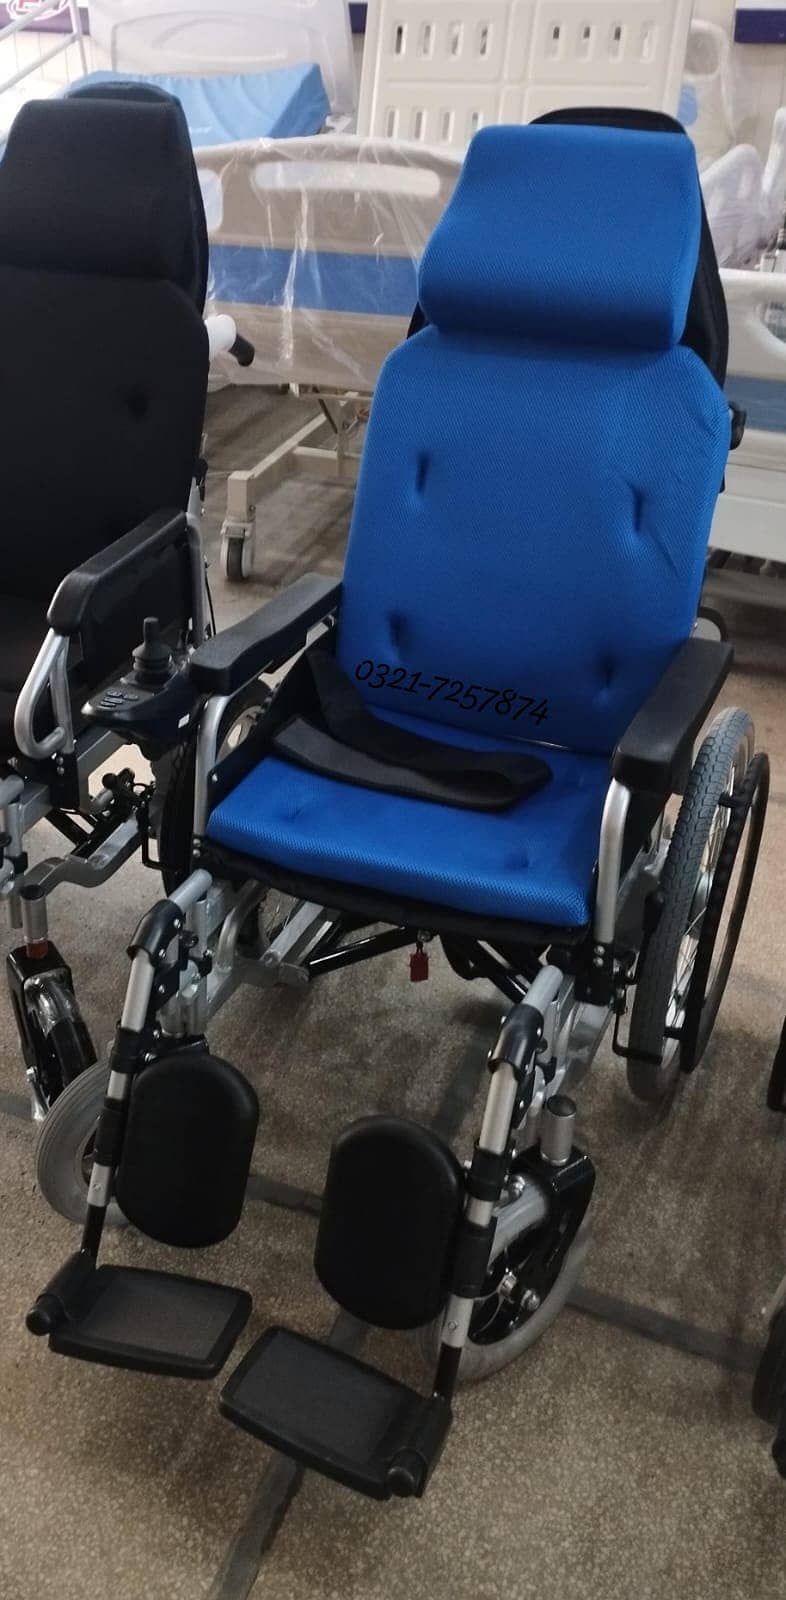 patient wheel chair / imported wheel chair / Executive big boy 1